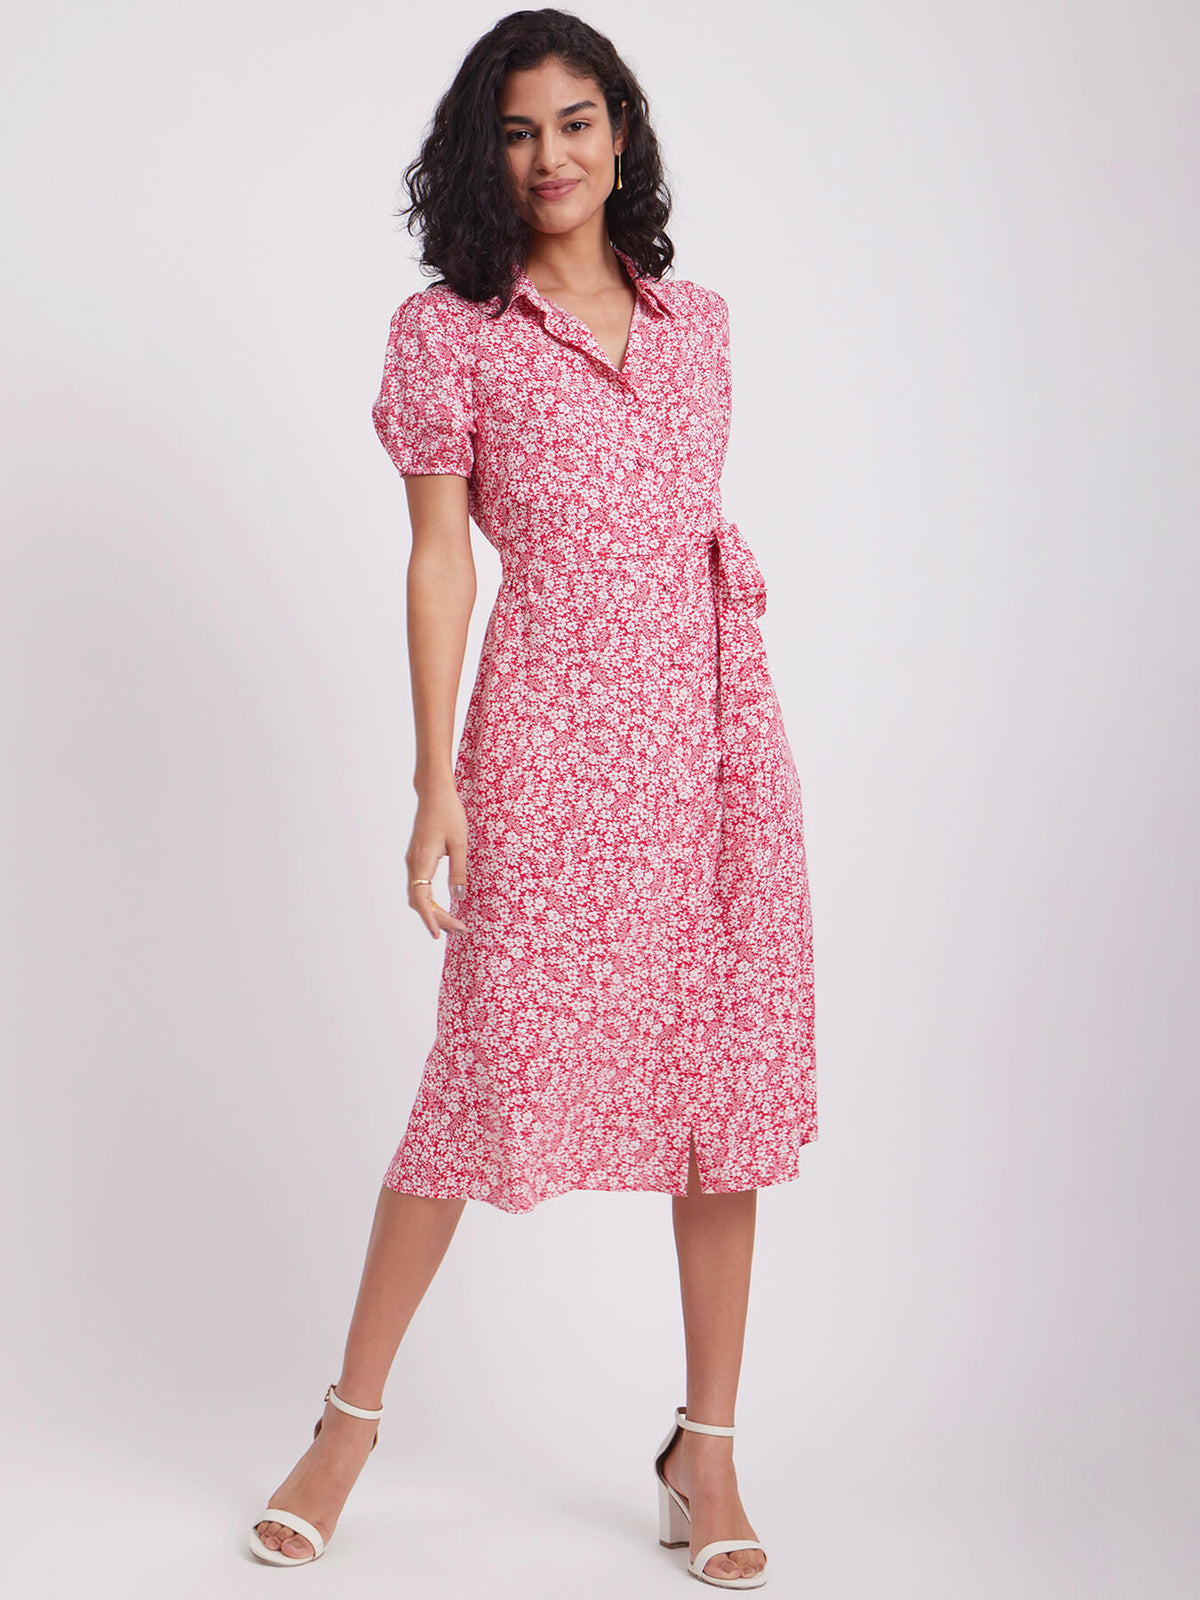 Floral Print Collared Dress - Red And White